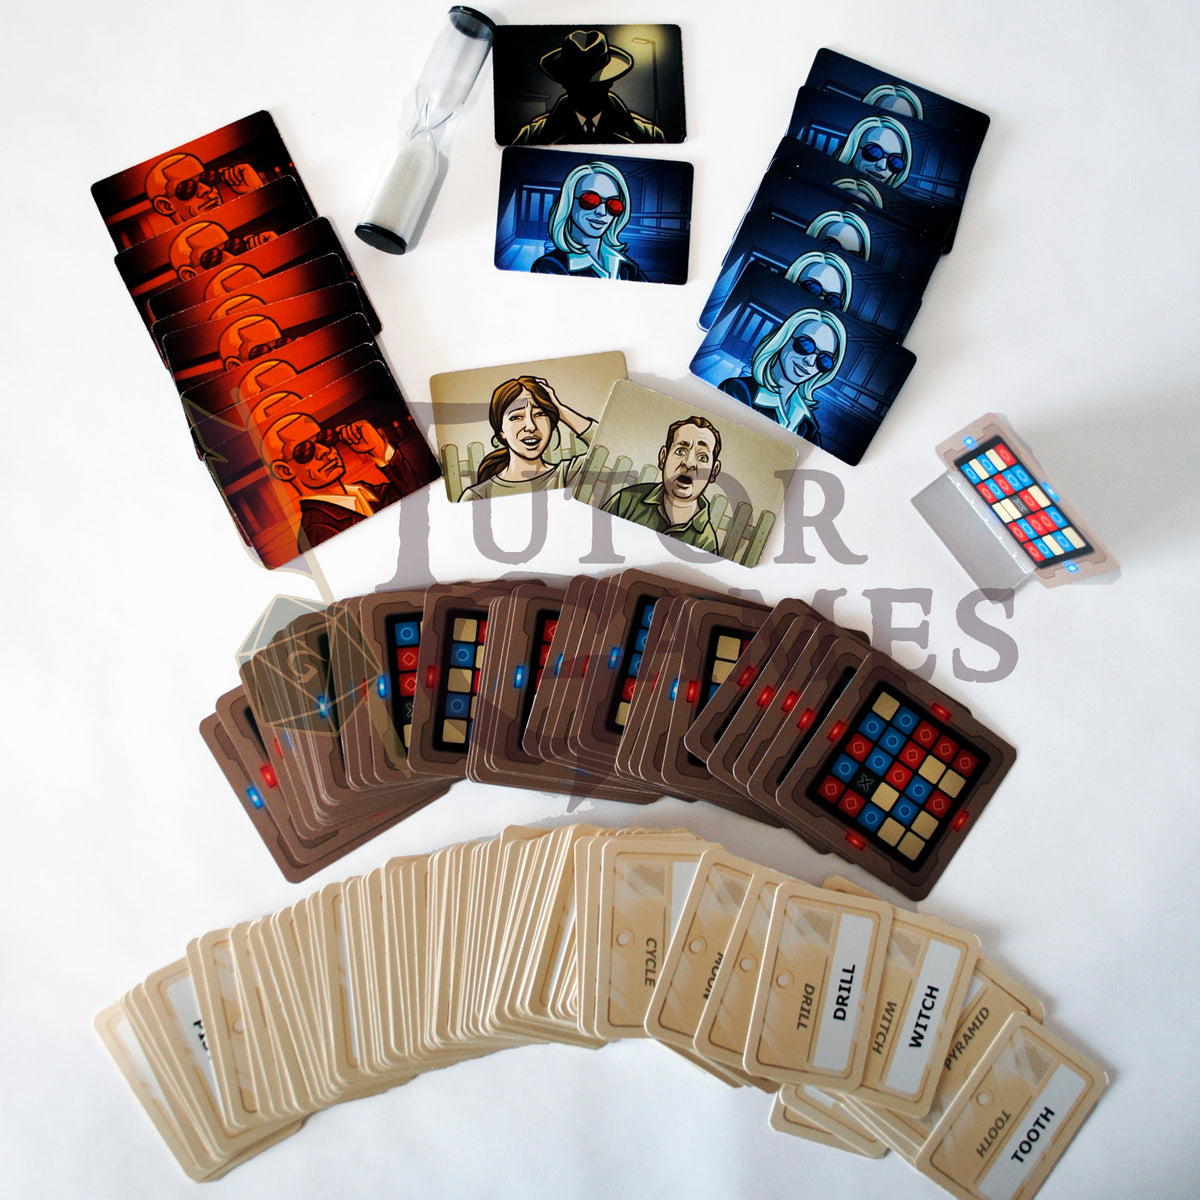 Codenames: Pictures, Board Game